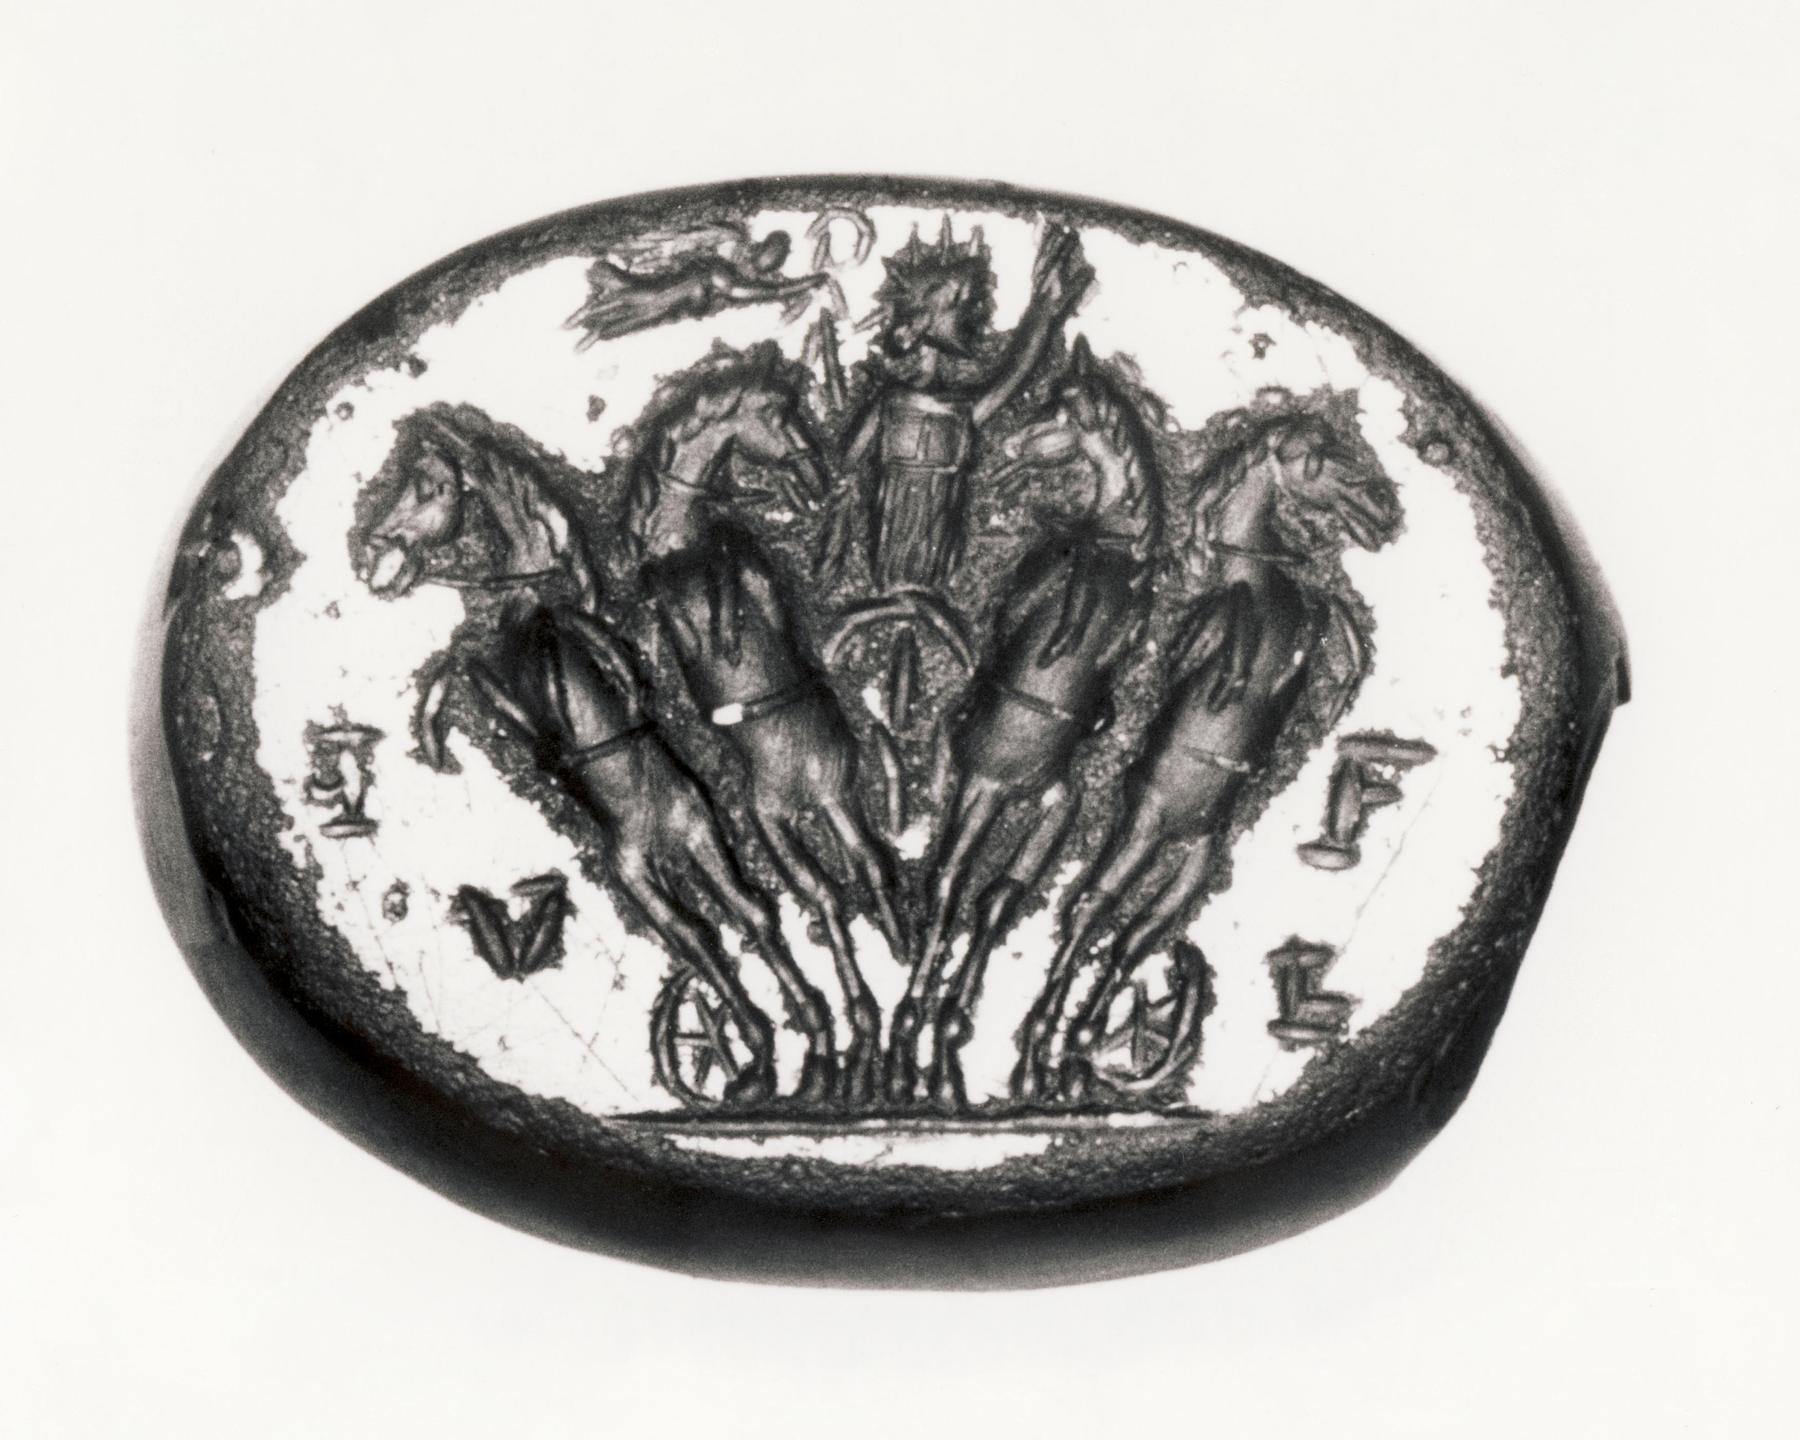 Sol in a chariot drawn by four horses crowned with a wreath by Victoria (obverse), Nereid on a sea-horse (reverse), I628